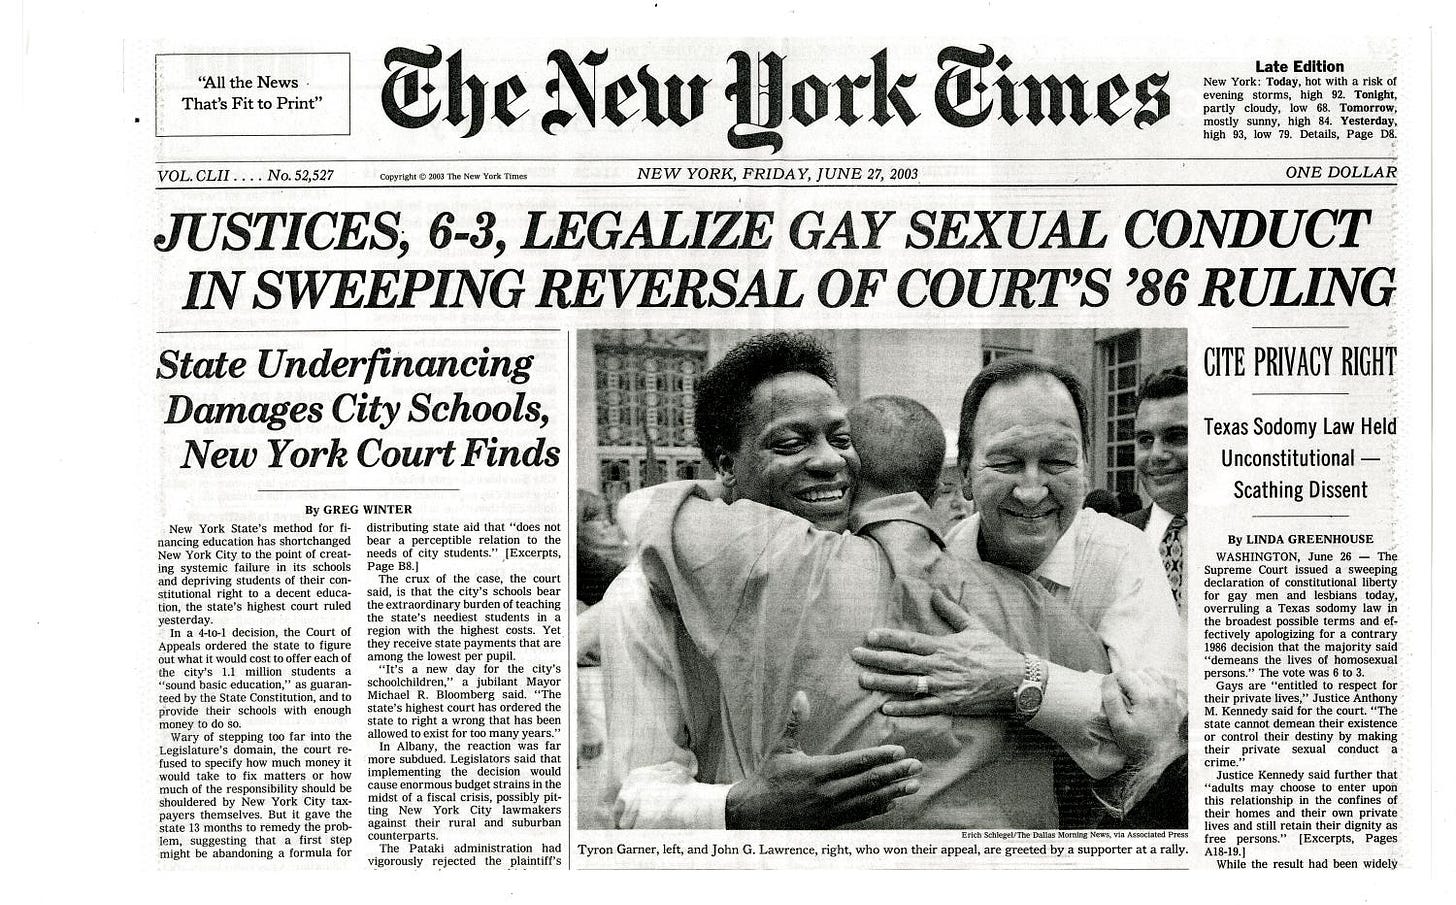 Justices, 6-3, Legalize Gay Sexual Conduct in Sweeping Reversal of Court's  '86 Ruling" article, JUne 27, 2003] - The Portal to Texas History